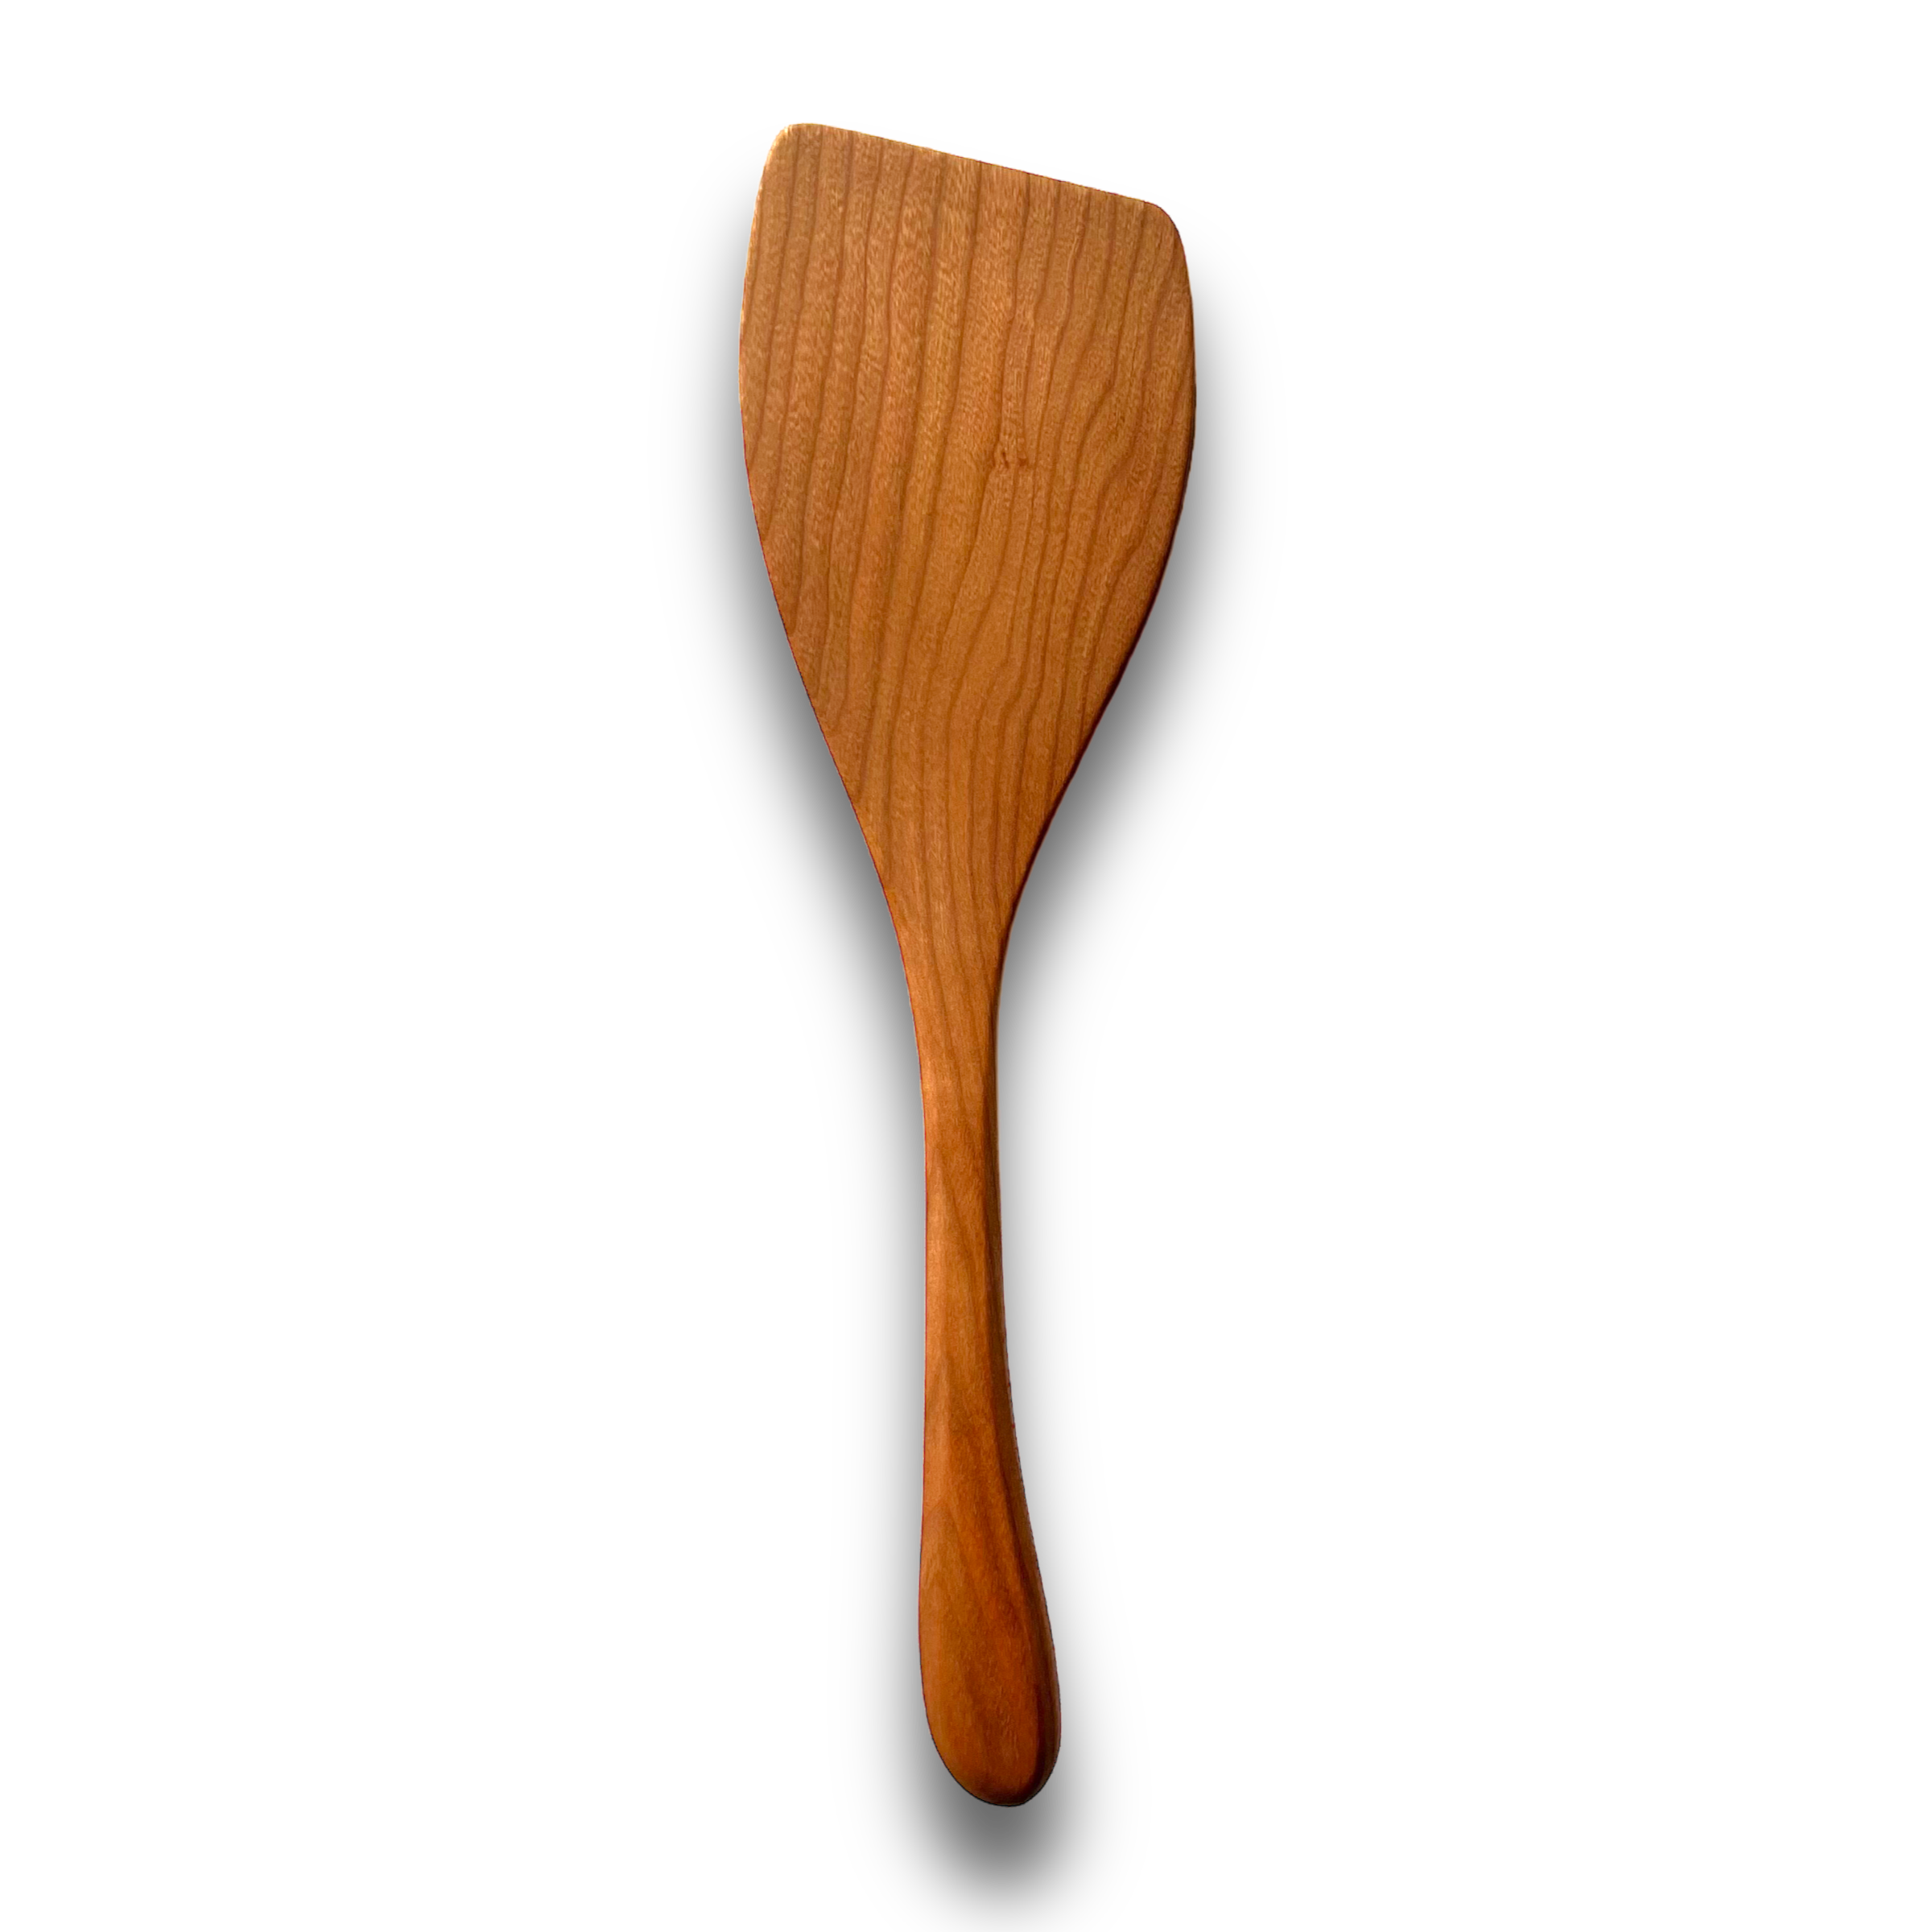 Amish-made Wooden Utensils